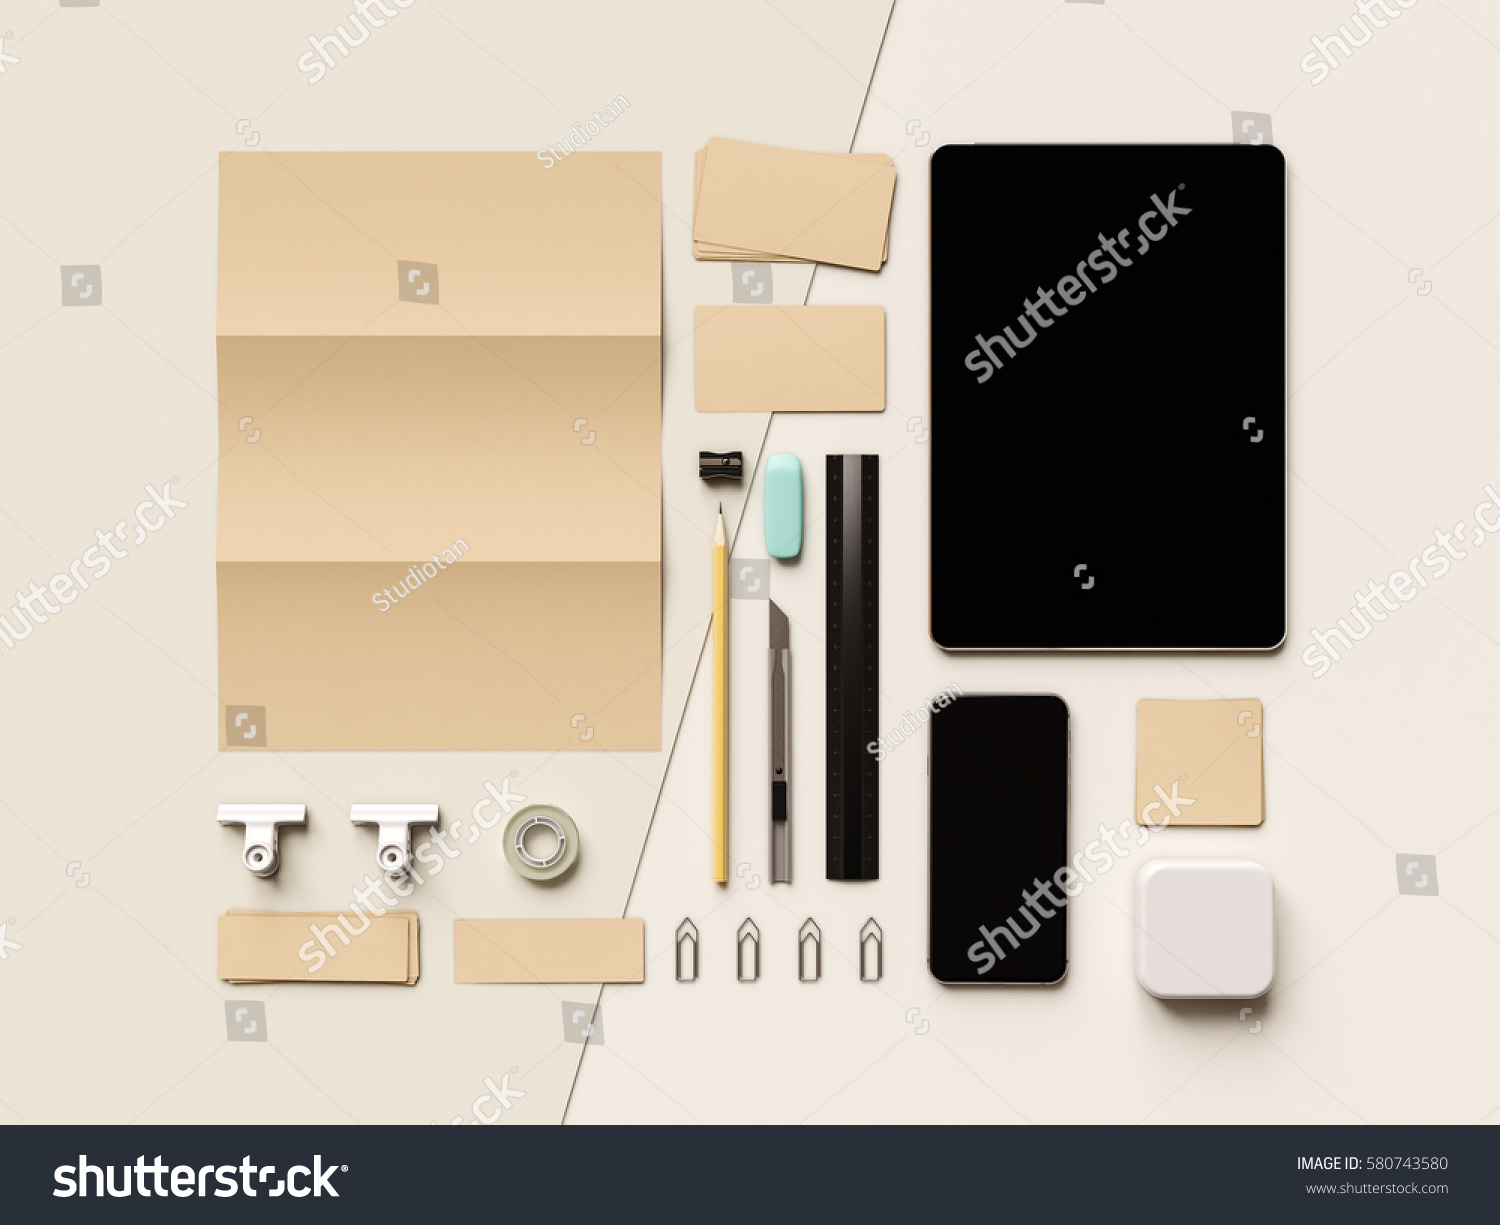 Corporate Identity. Branding Mock Up. Office supplies, Gadgets. 3D illustration. High quality #580743580